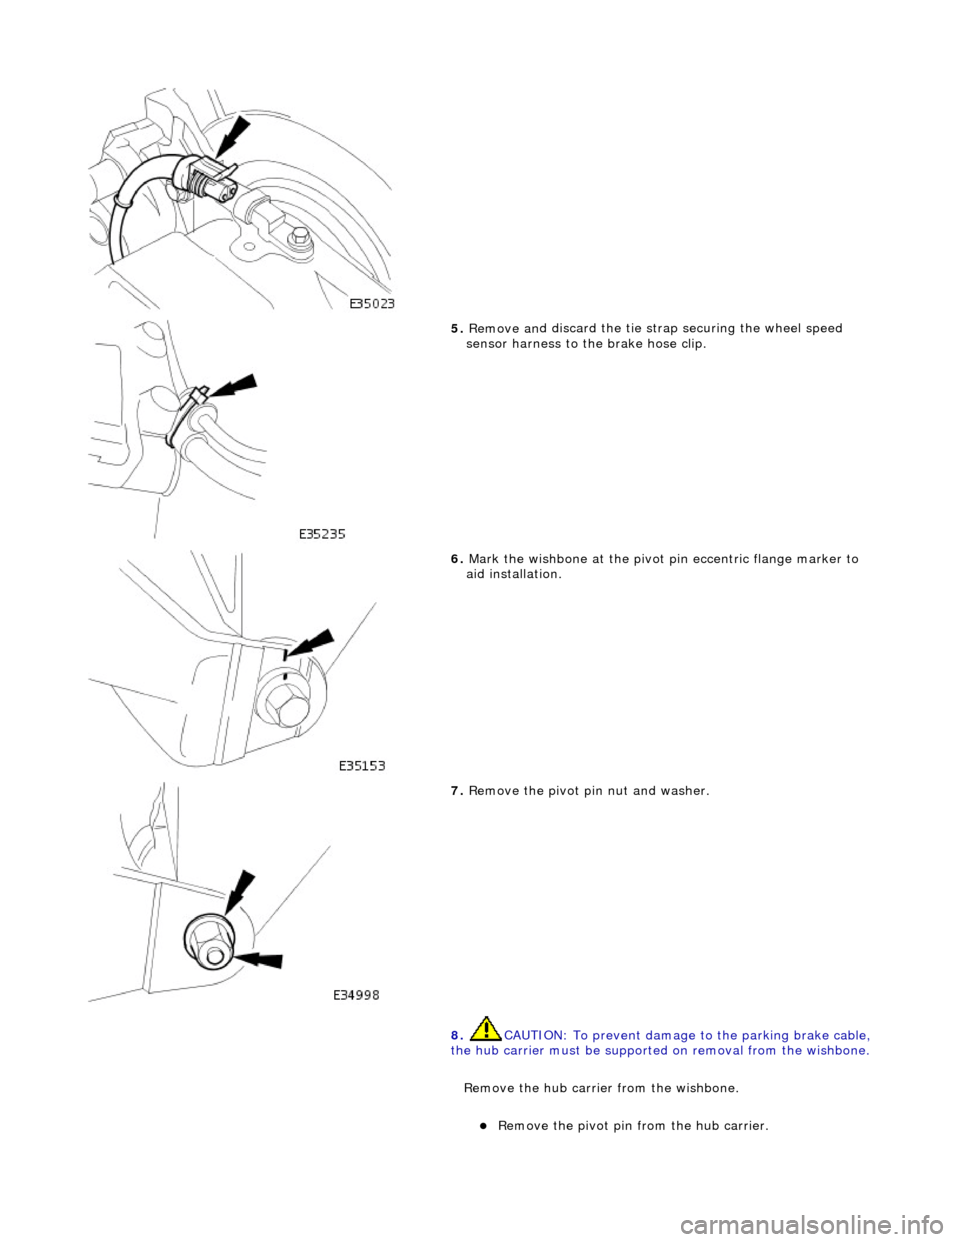 JAGUAR X308 1998 2.G Workshop Manual  
 
5. Remove an
 d discard the tie st
rap securing the wheel speed 
sensor harness to the brake hose clip. 
 
6.  Mark the wi
 shbone at the pivot 
pin eccentric flange marker to 
aid installation. 
